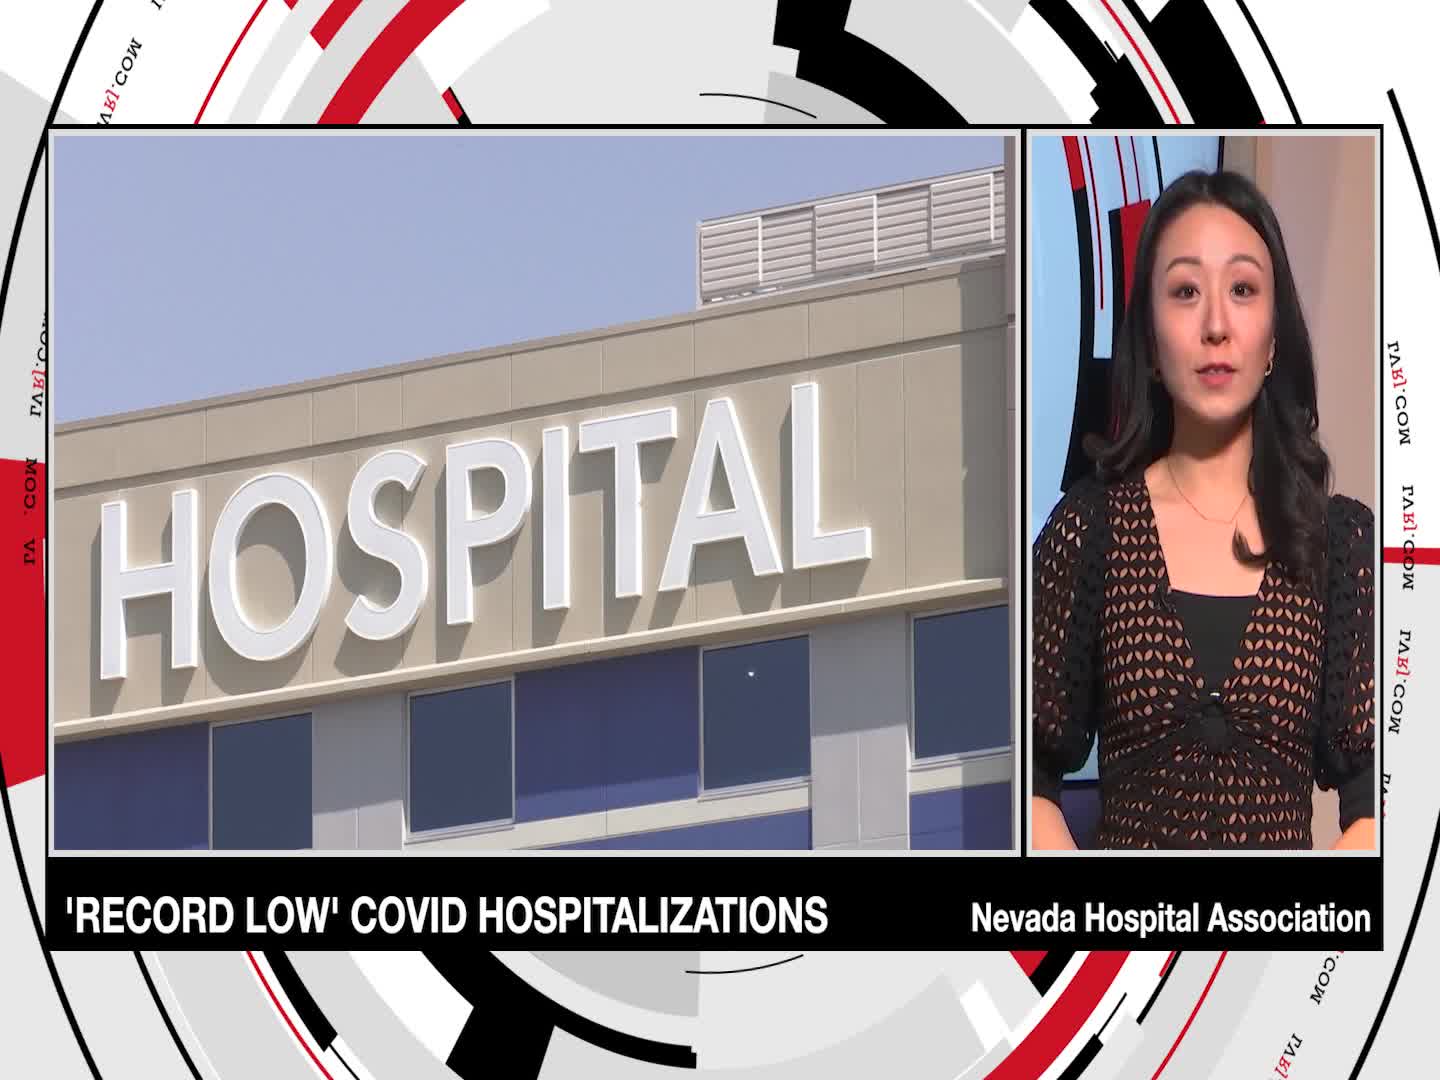 Record Low Covid Hospitalizations